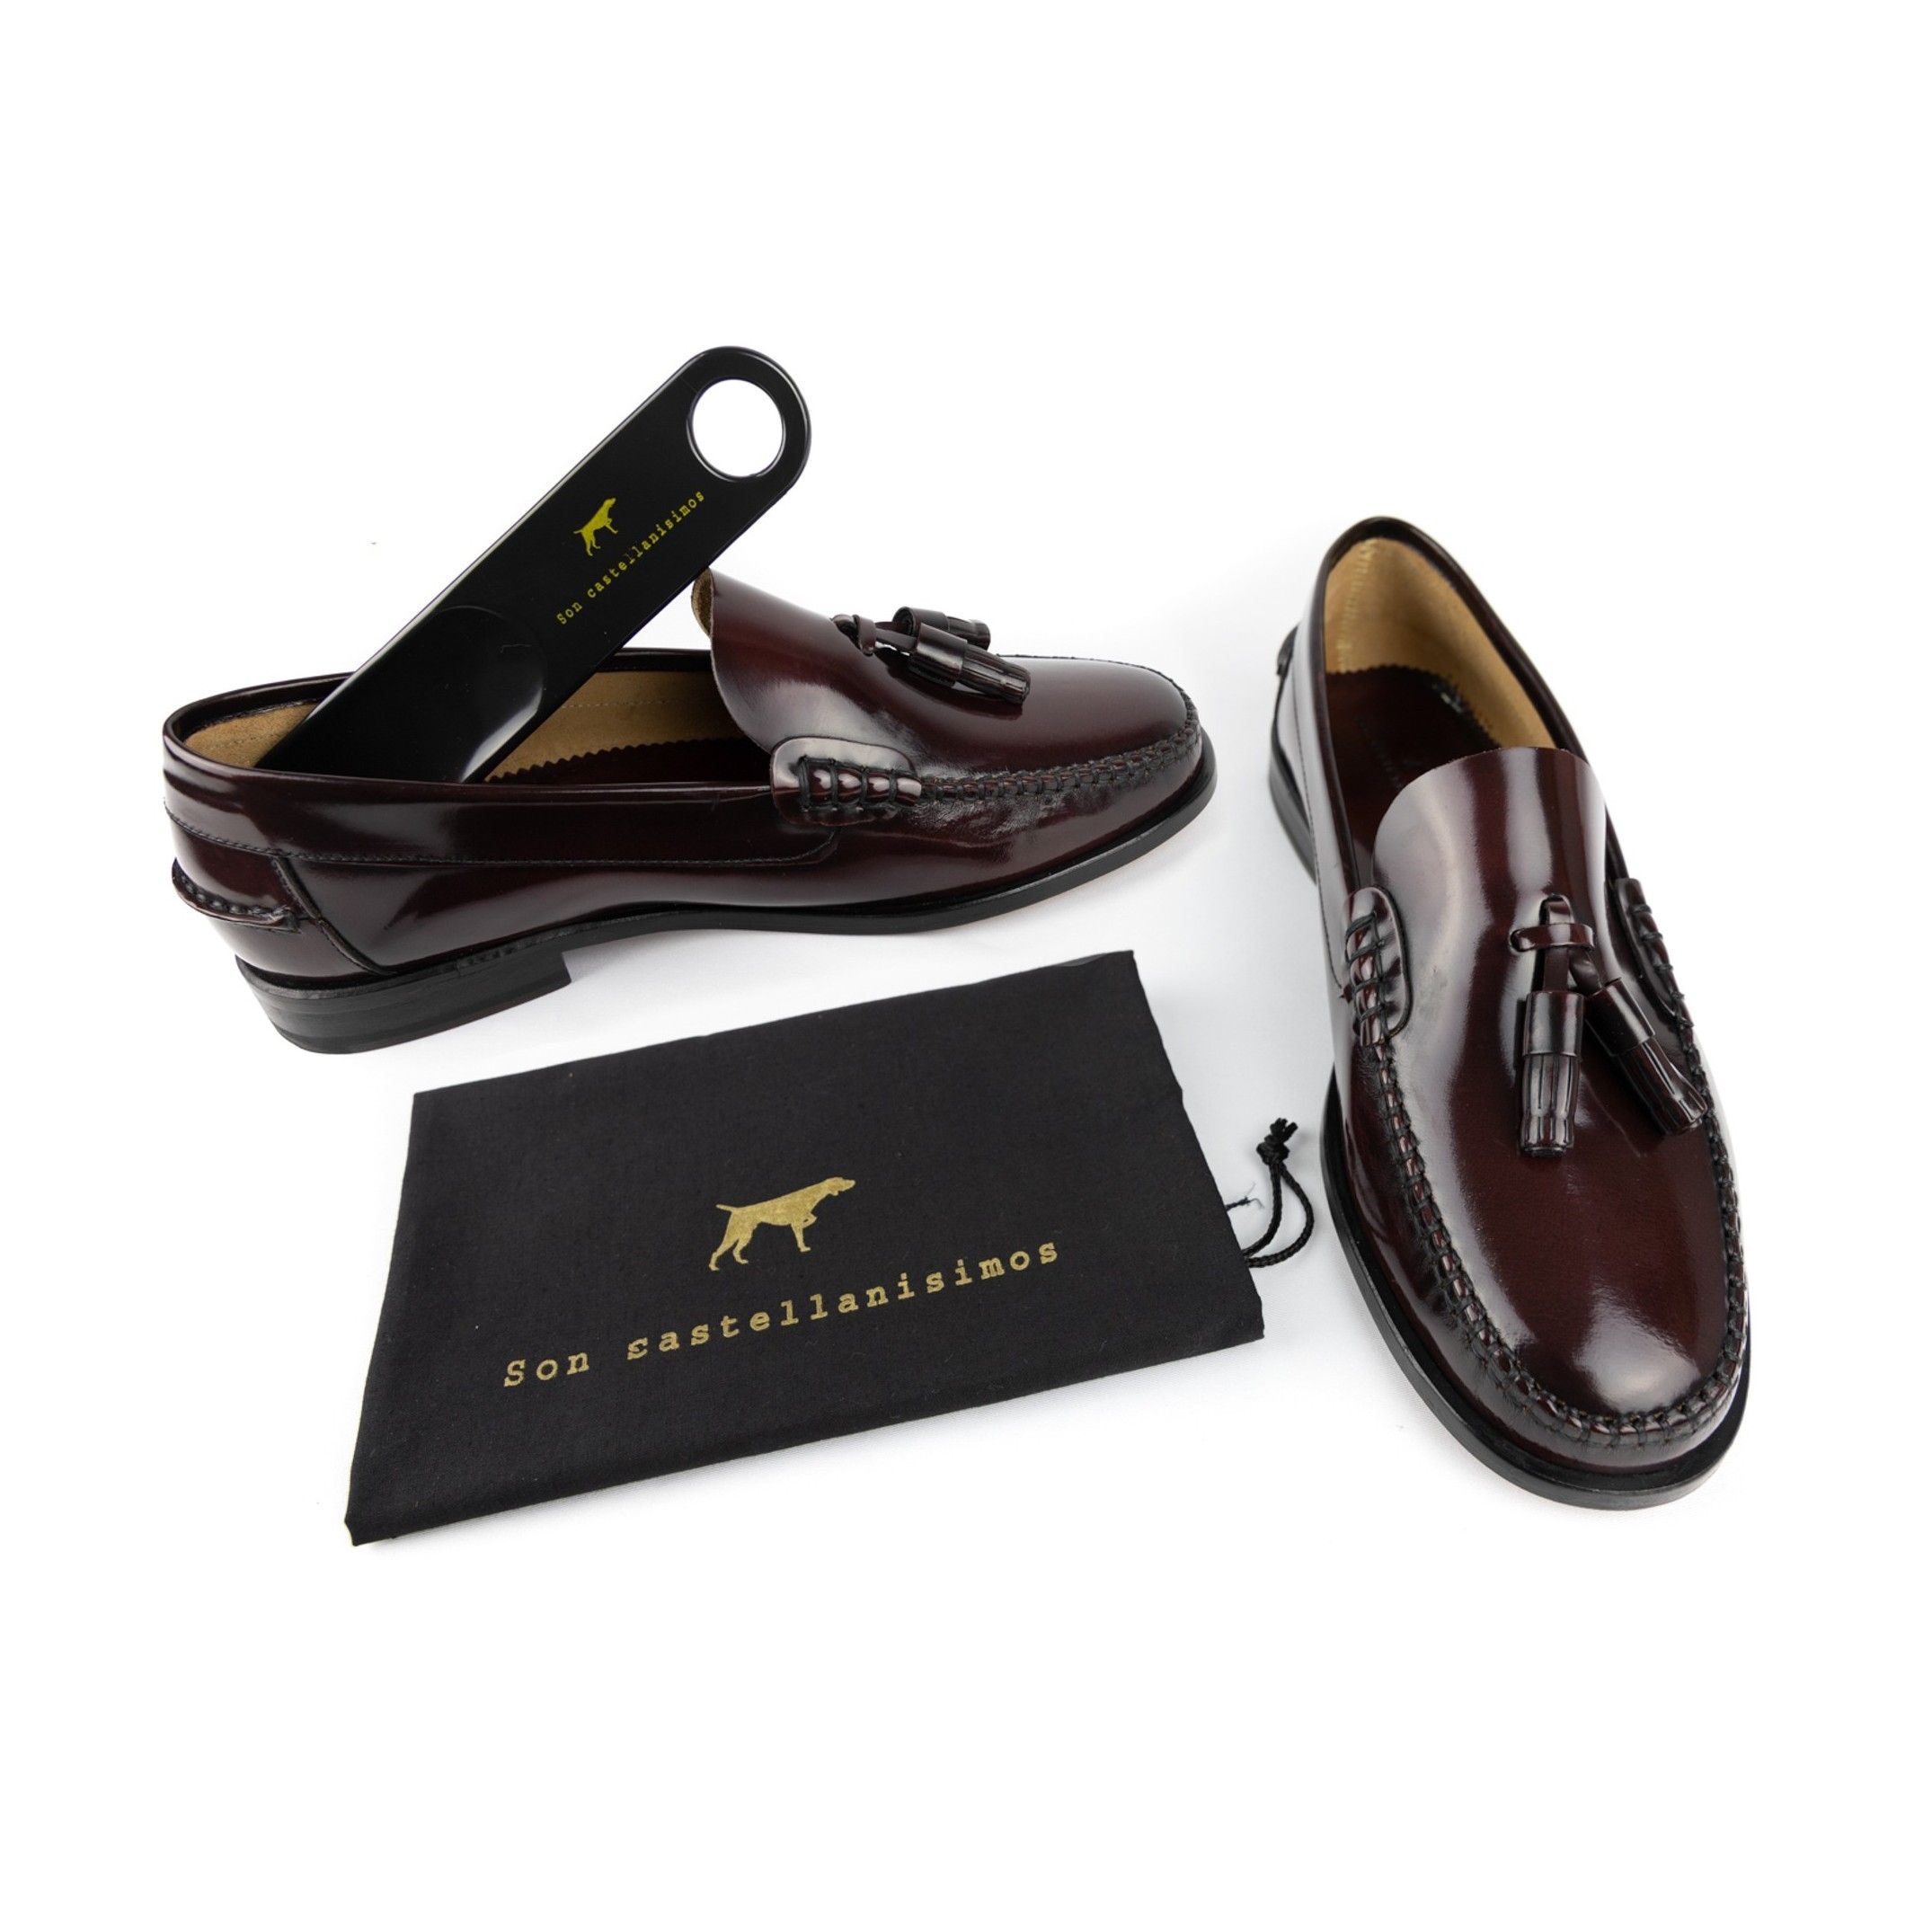 Florentic leather loafers. Premium collection of Son Castellanisimos. Outer material: cowhide leather. Inner: Cowhide leather. Closure: no closure / open. Inner lining and insole: cowhide leather. Outsole Material: high quality leather. Heel height: 2 cm. Designed and manufactured in Spain.